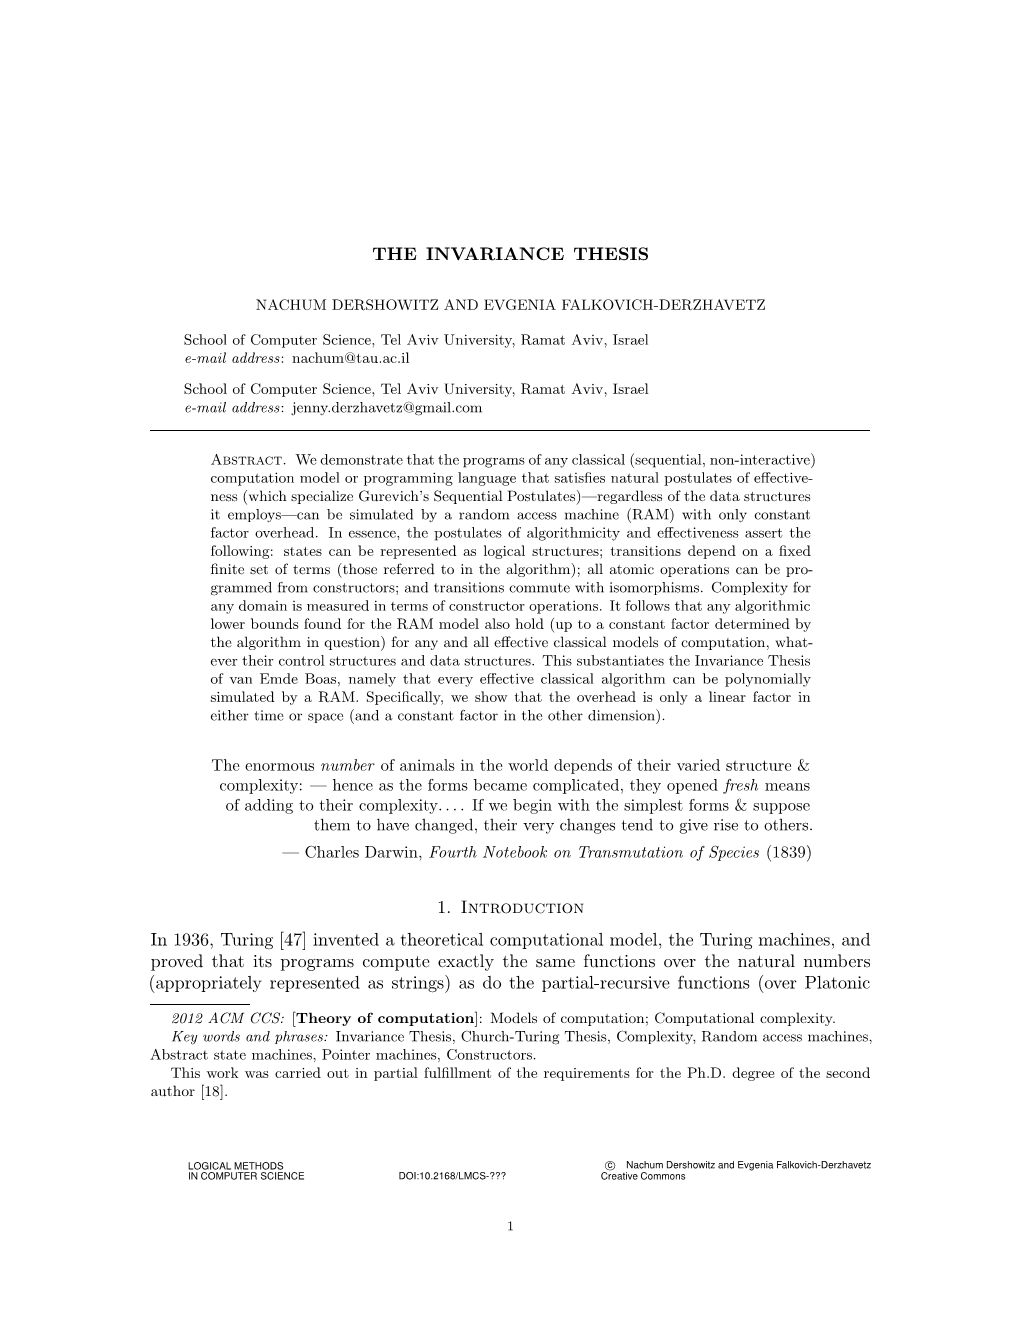 THE INVARIANCE THESIS 1. Introduction in 1936, Turing [47